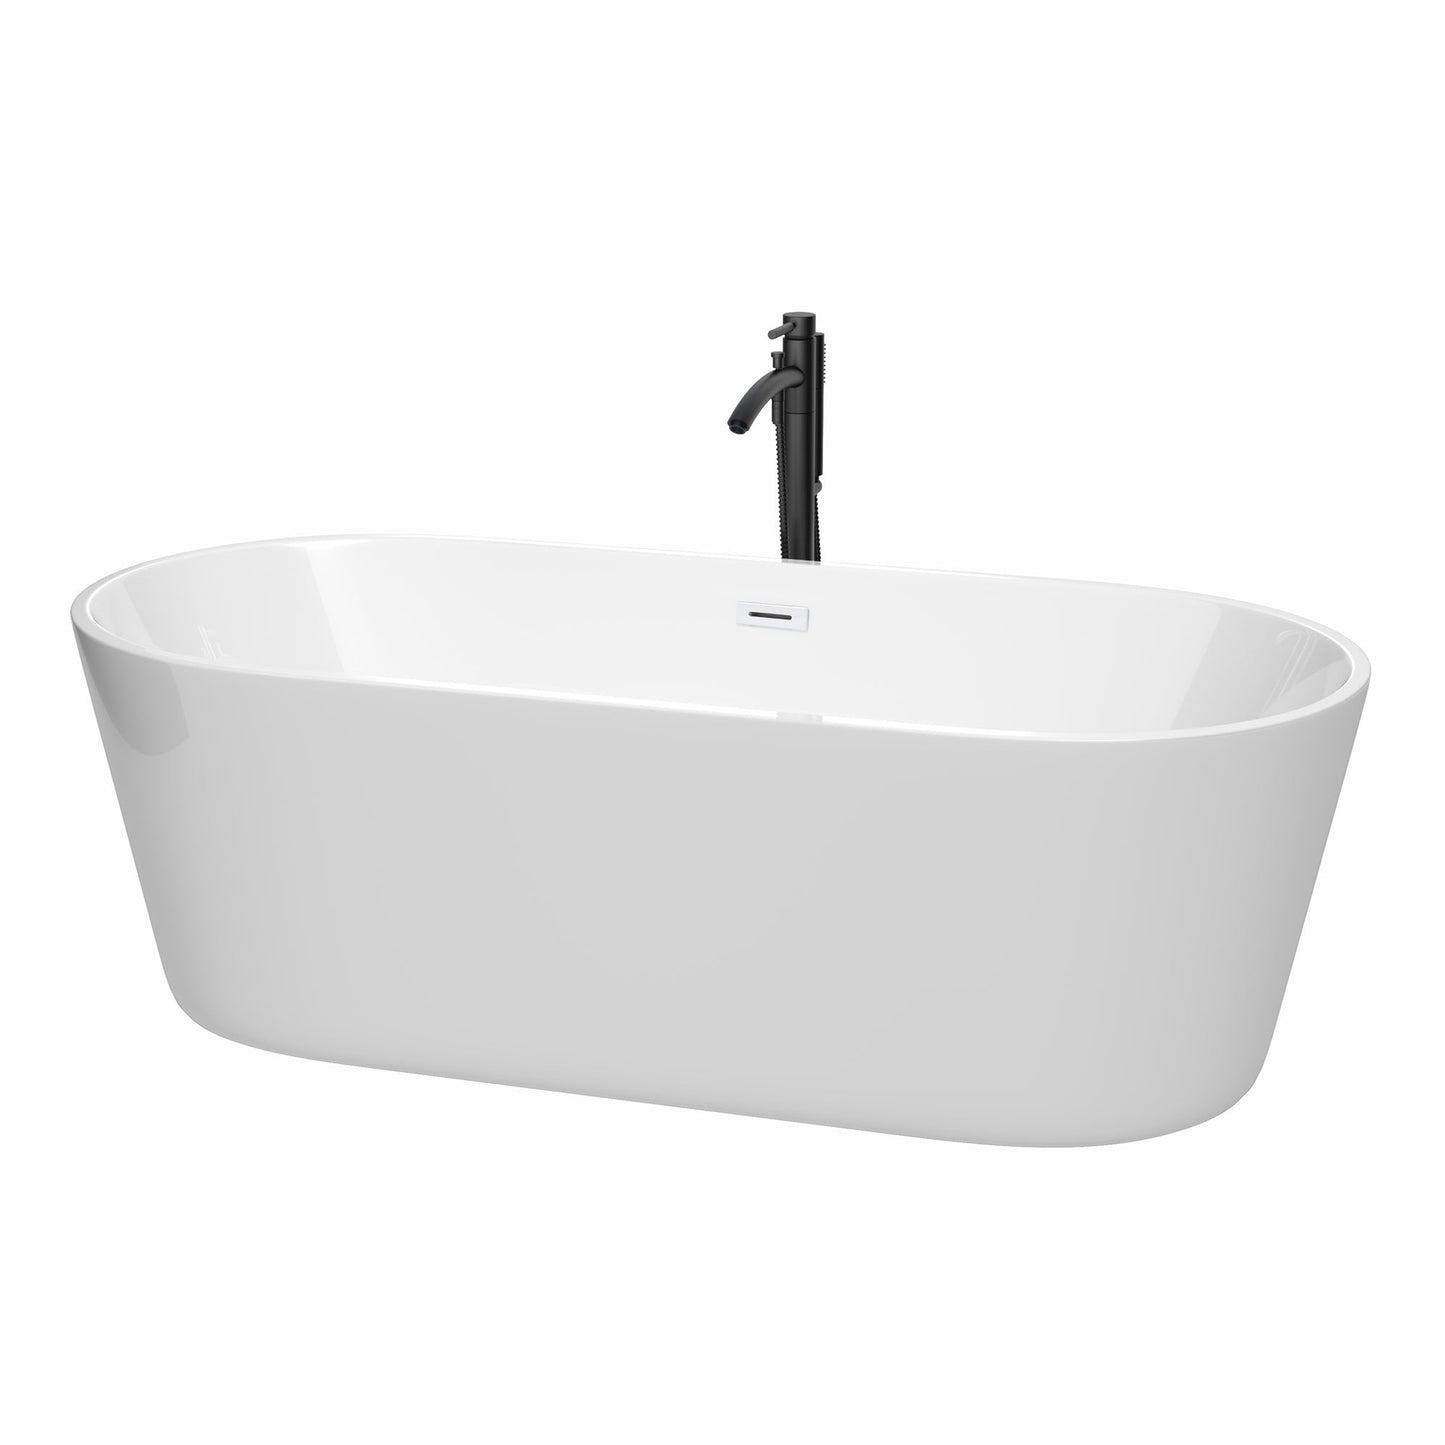 Wyndham Collection Carissa 71" Freestanding Bathtub in White With Shiny White Trim and Floor Mounted Faucet in Matte Black